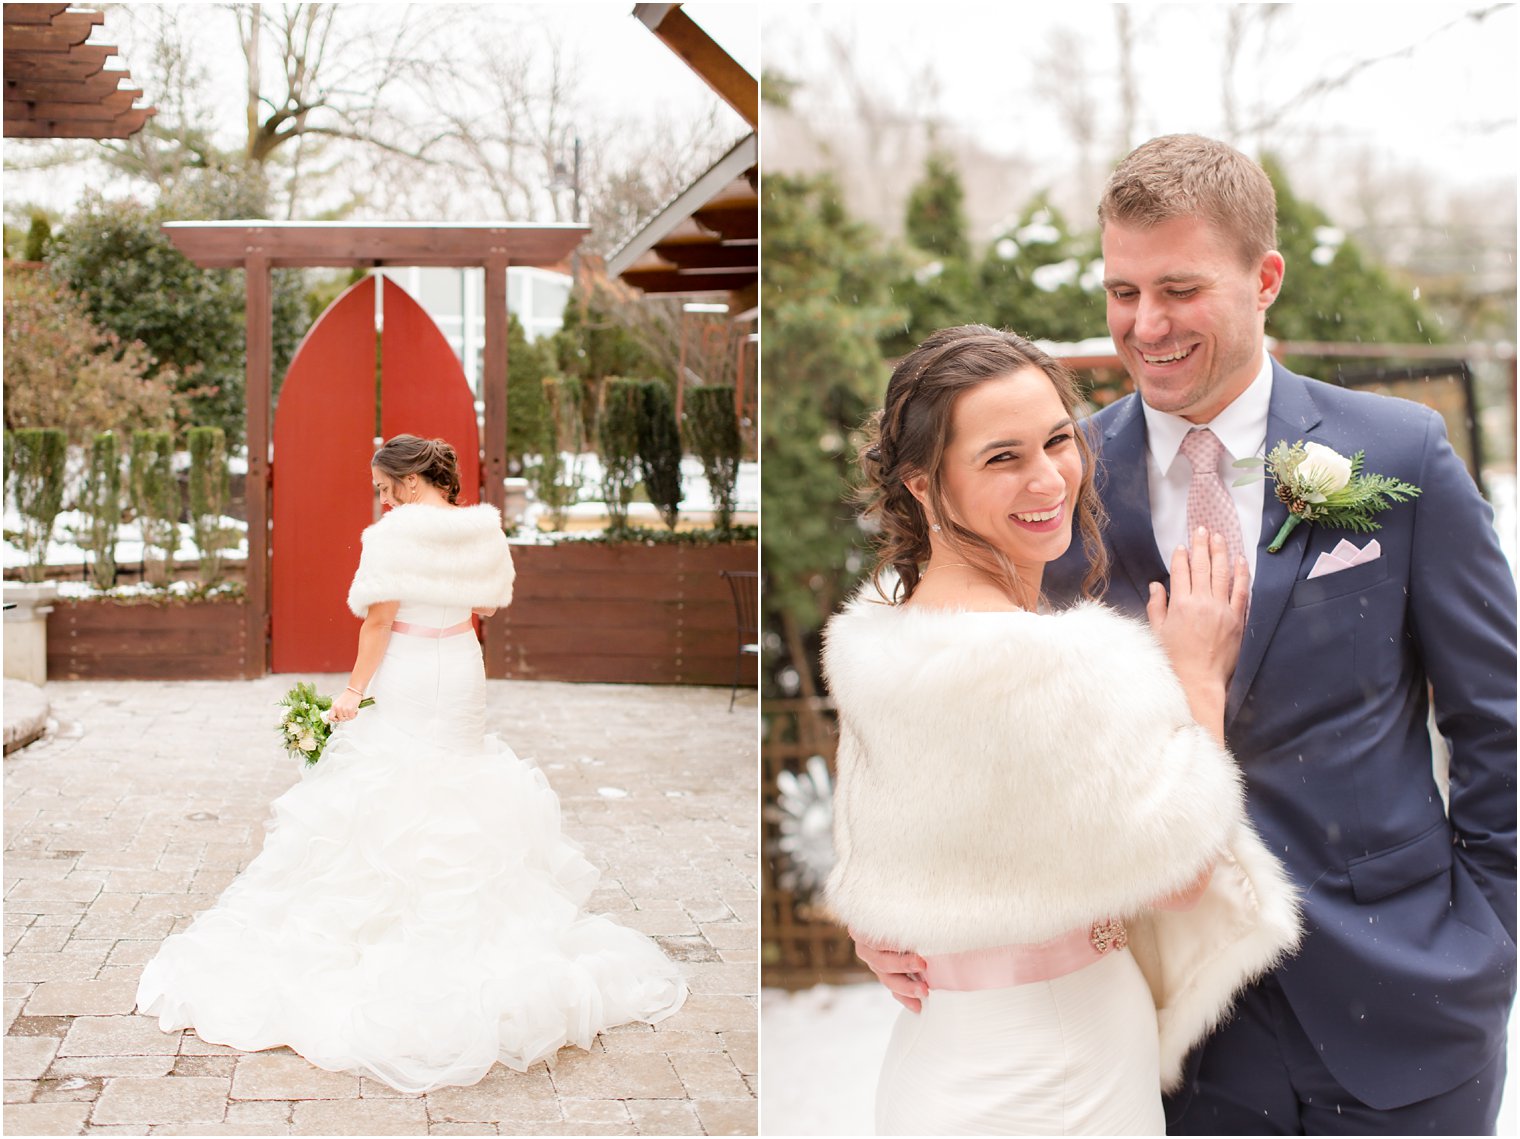 Bride and groom photo at Stone House at Stirling Ridge in Warren, NJ